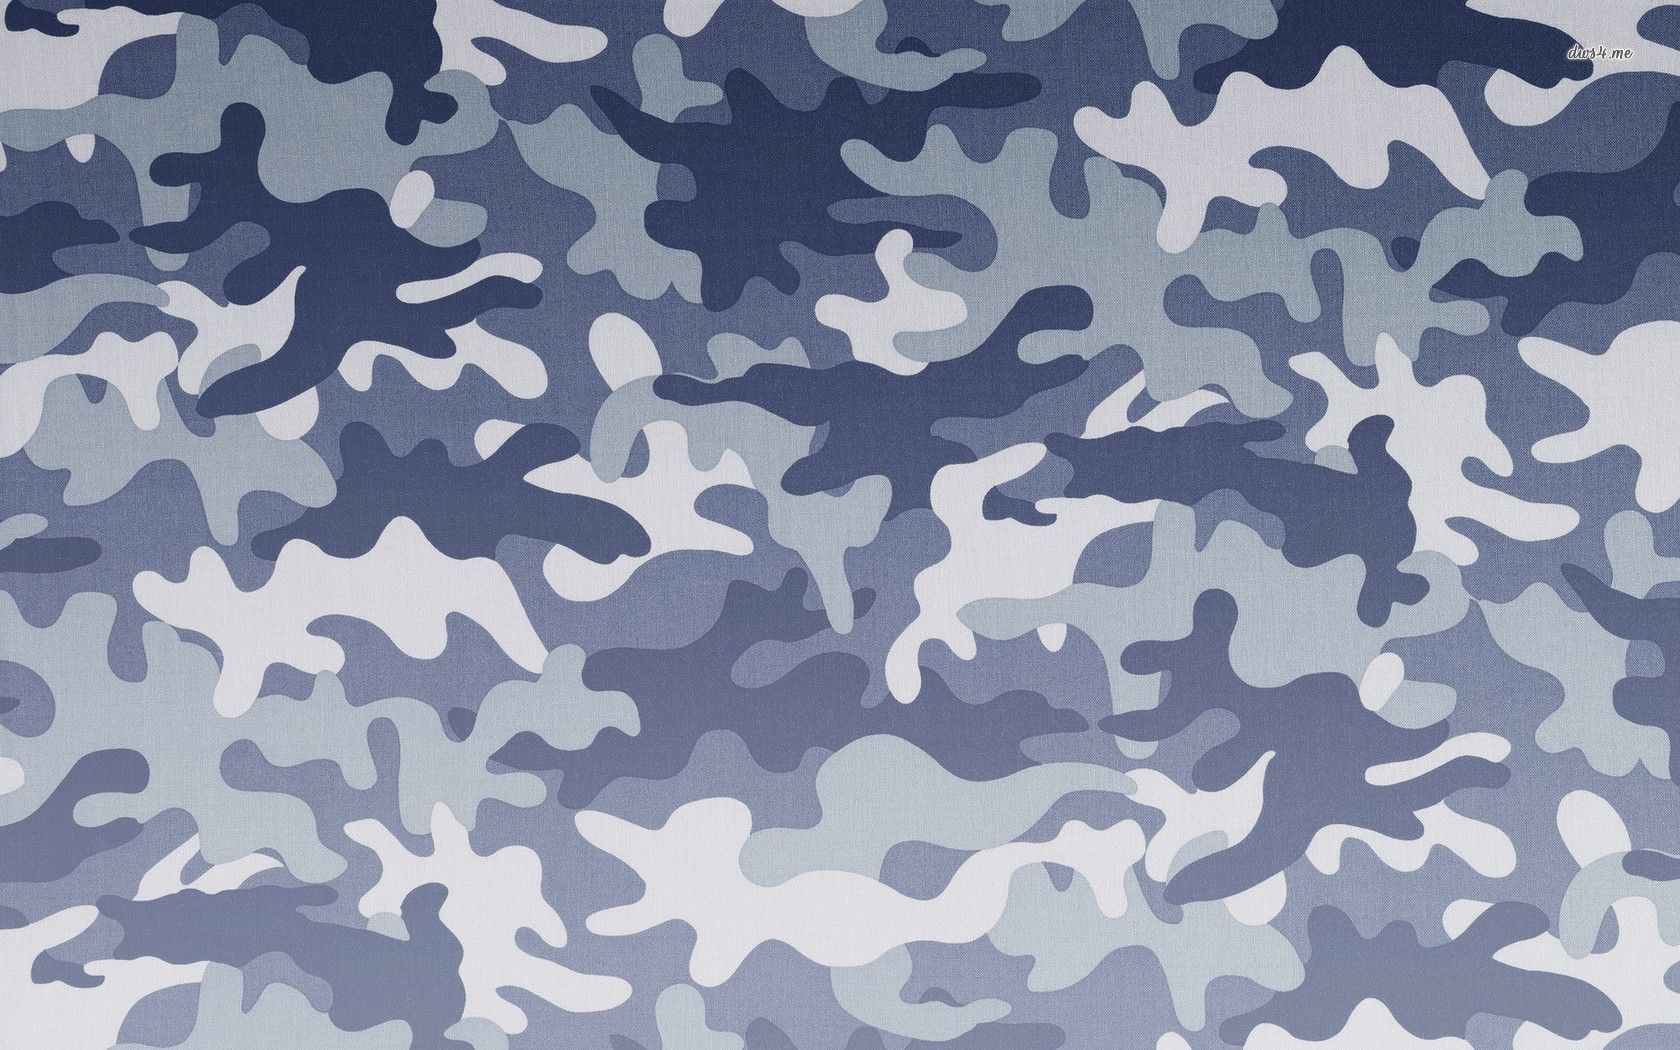 Camouflage pattern wallpaper - Abstract wallpapers